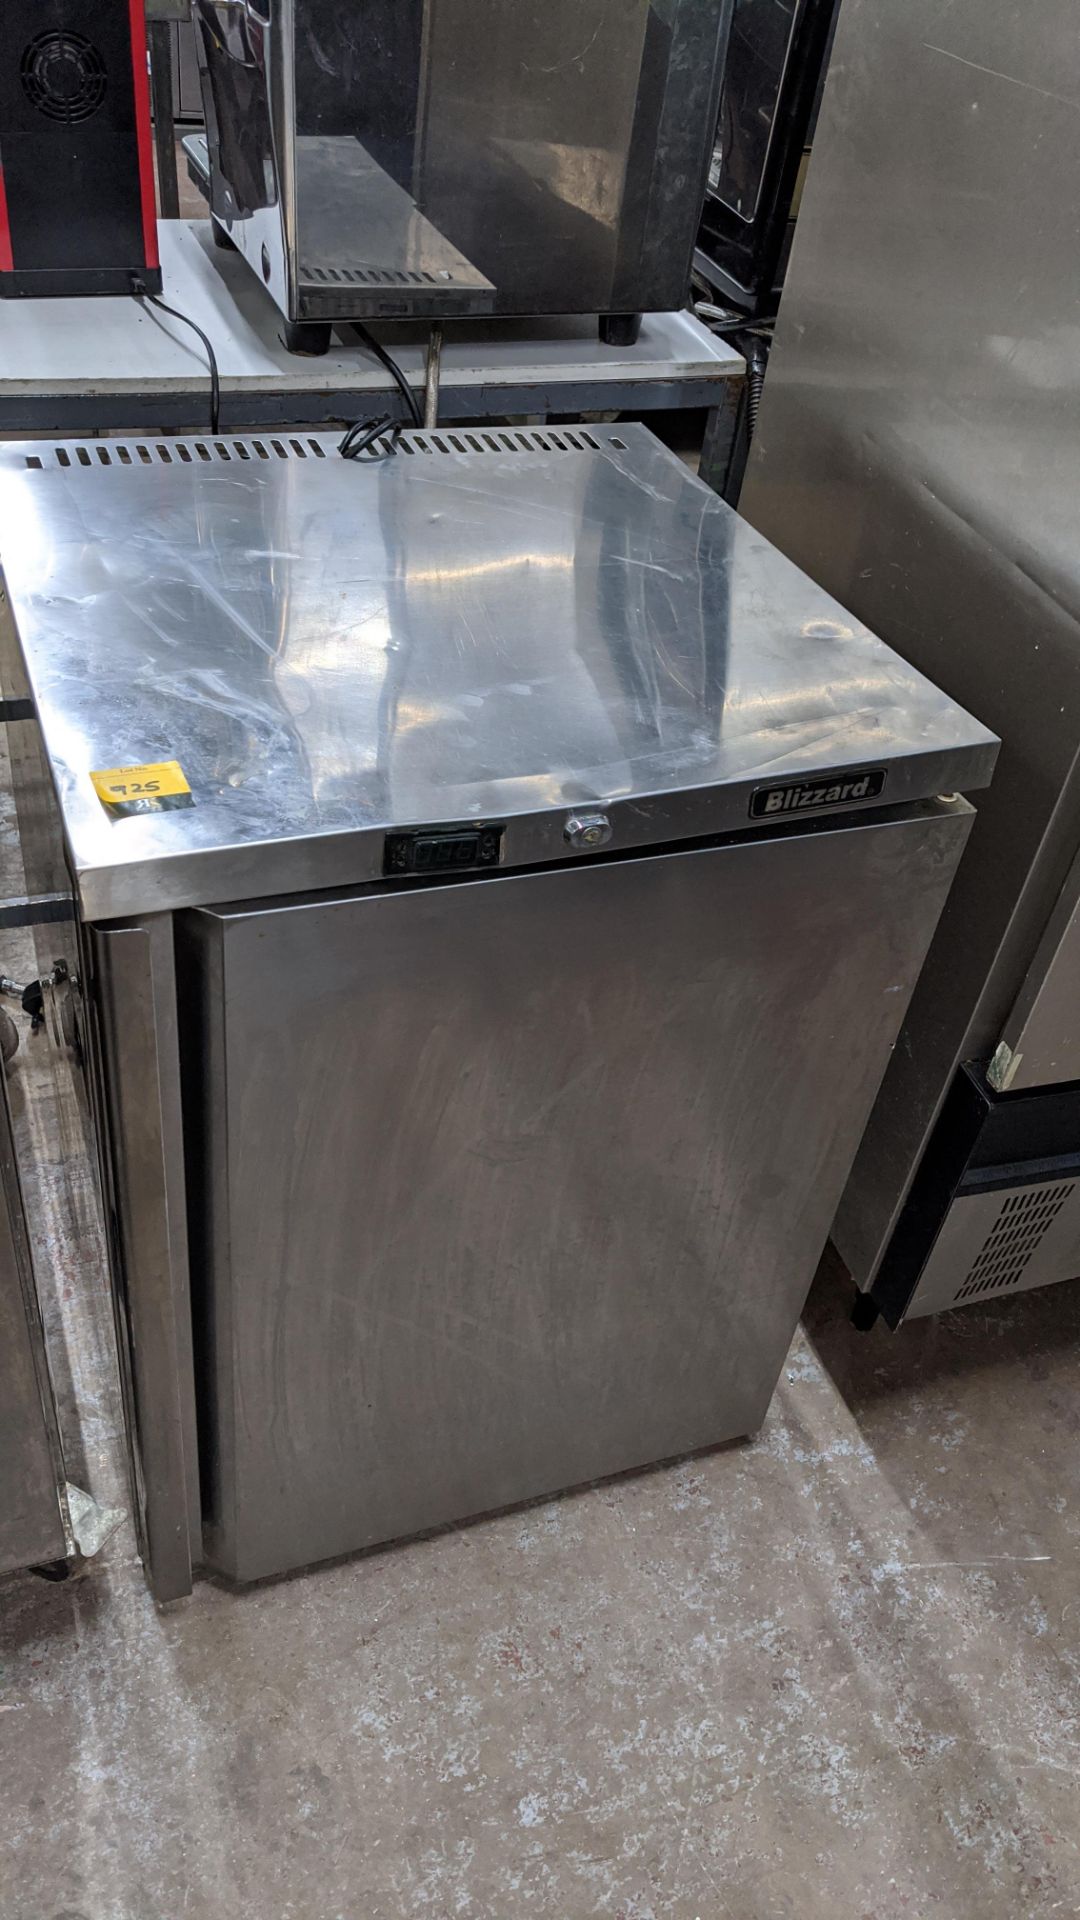 Blizzard stainless steel under counter freezer. IMPORTANT: Please remember goods successfully bid - Image 2 of 4